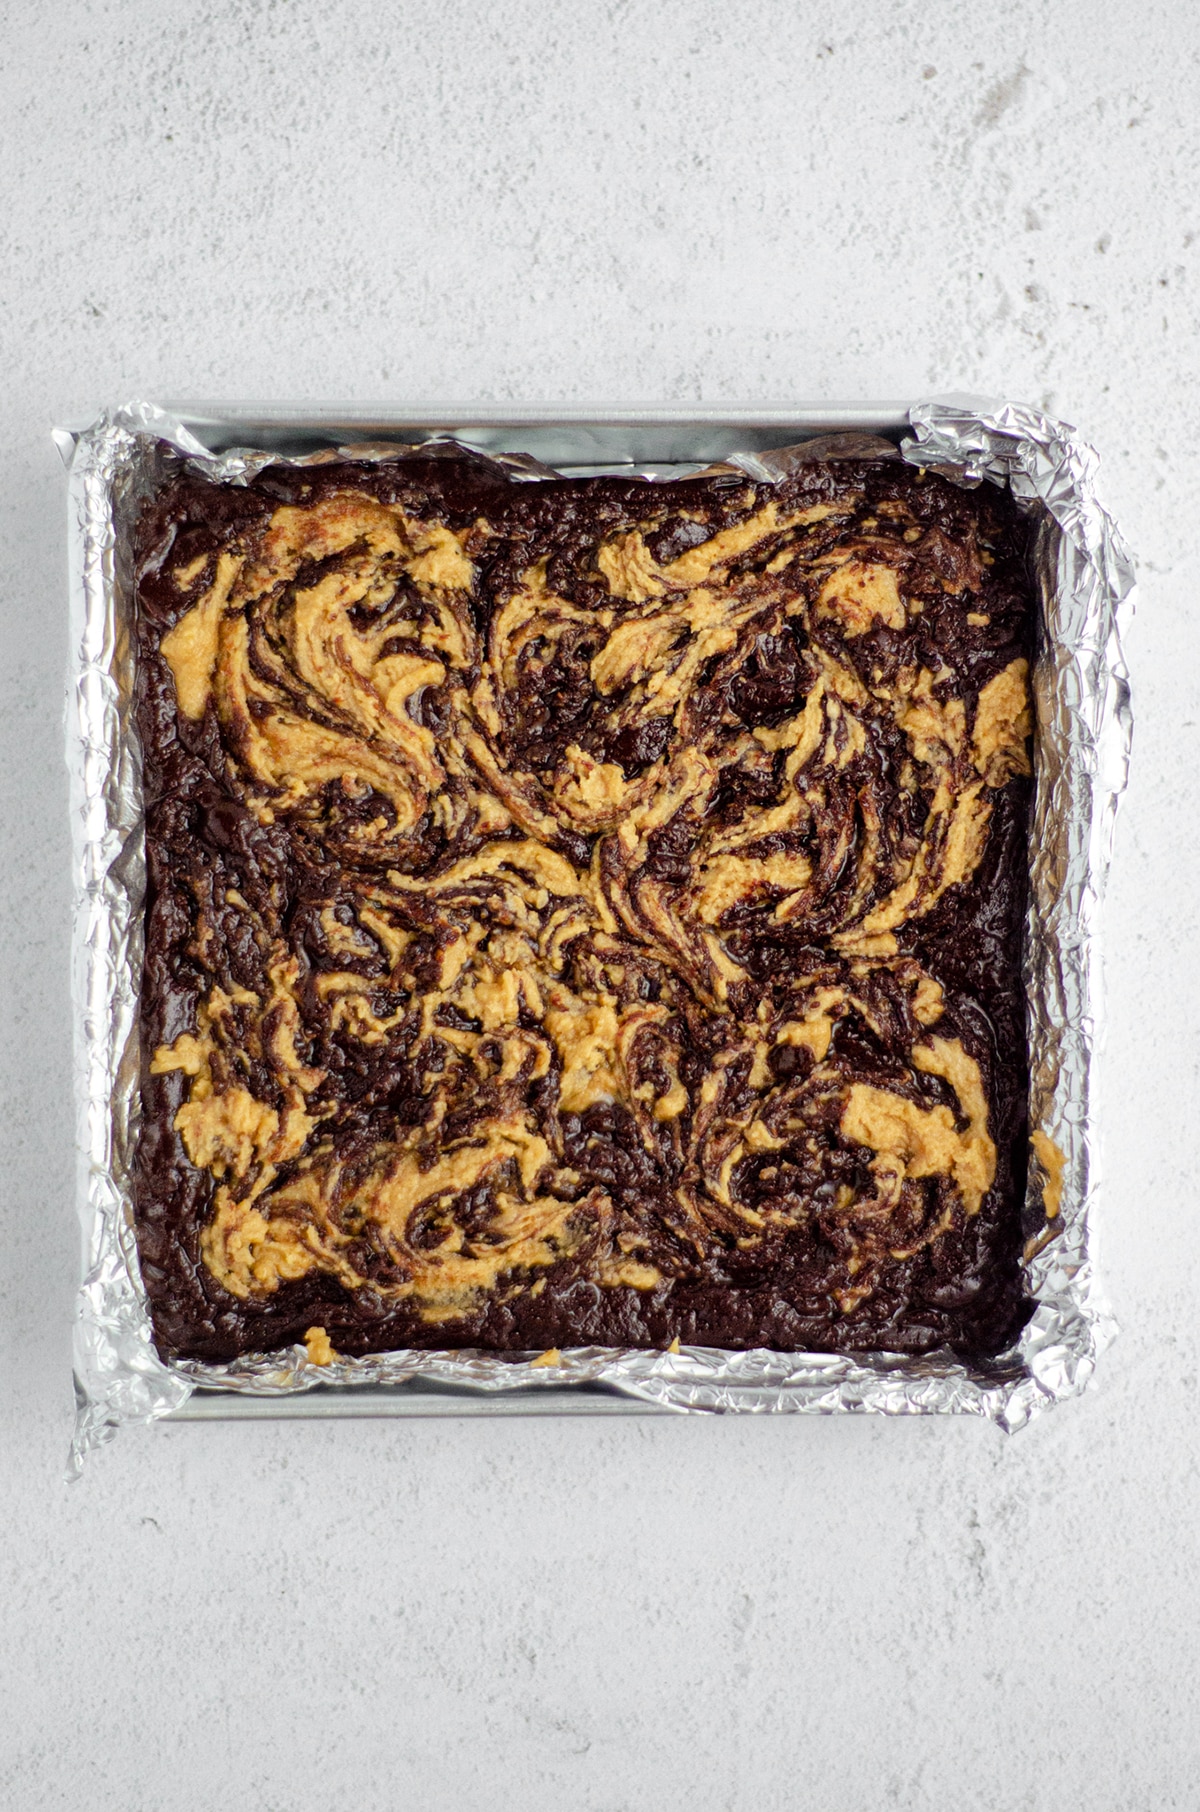 peanut butter cookie batter swirled into brownie batter to make peanut butter cookie brownies 